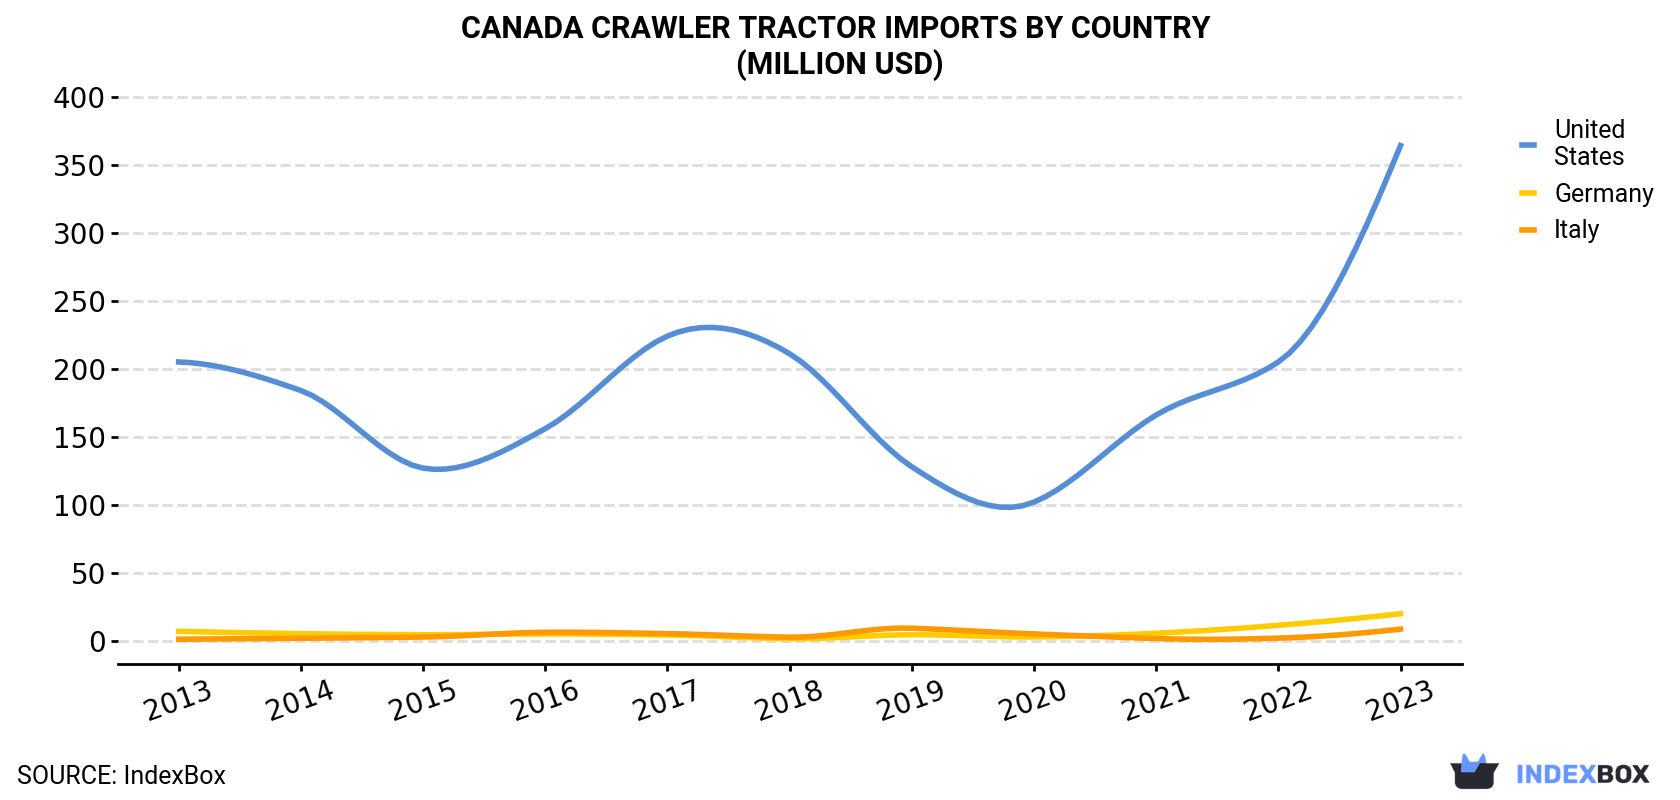 Canada Crawler Tractor Imports By Country (Million USD)